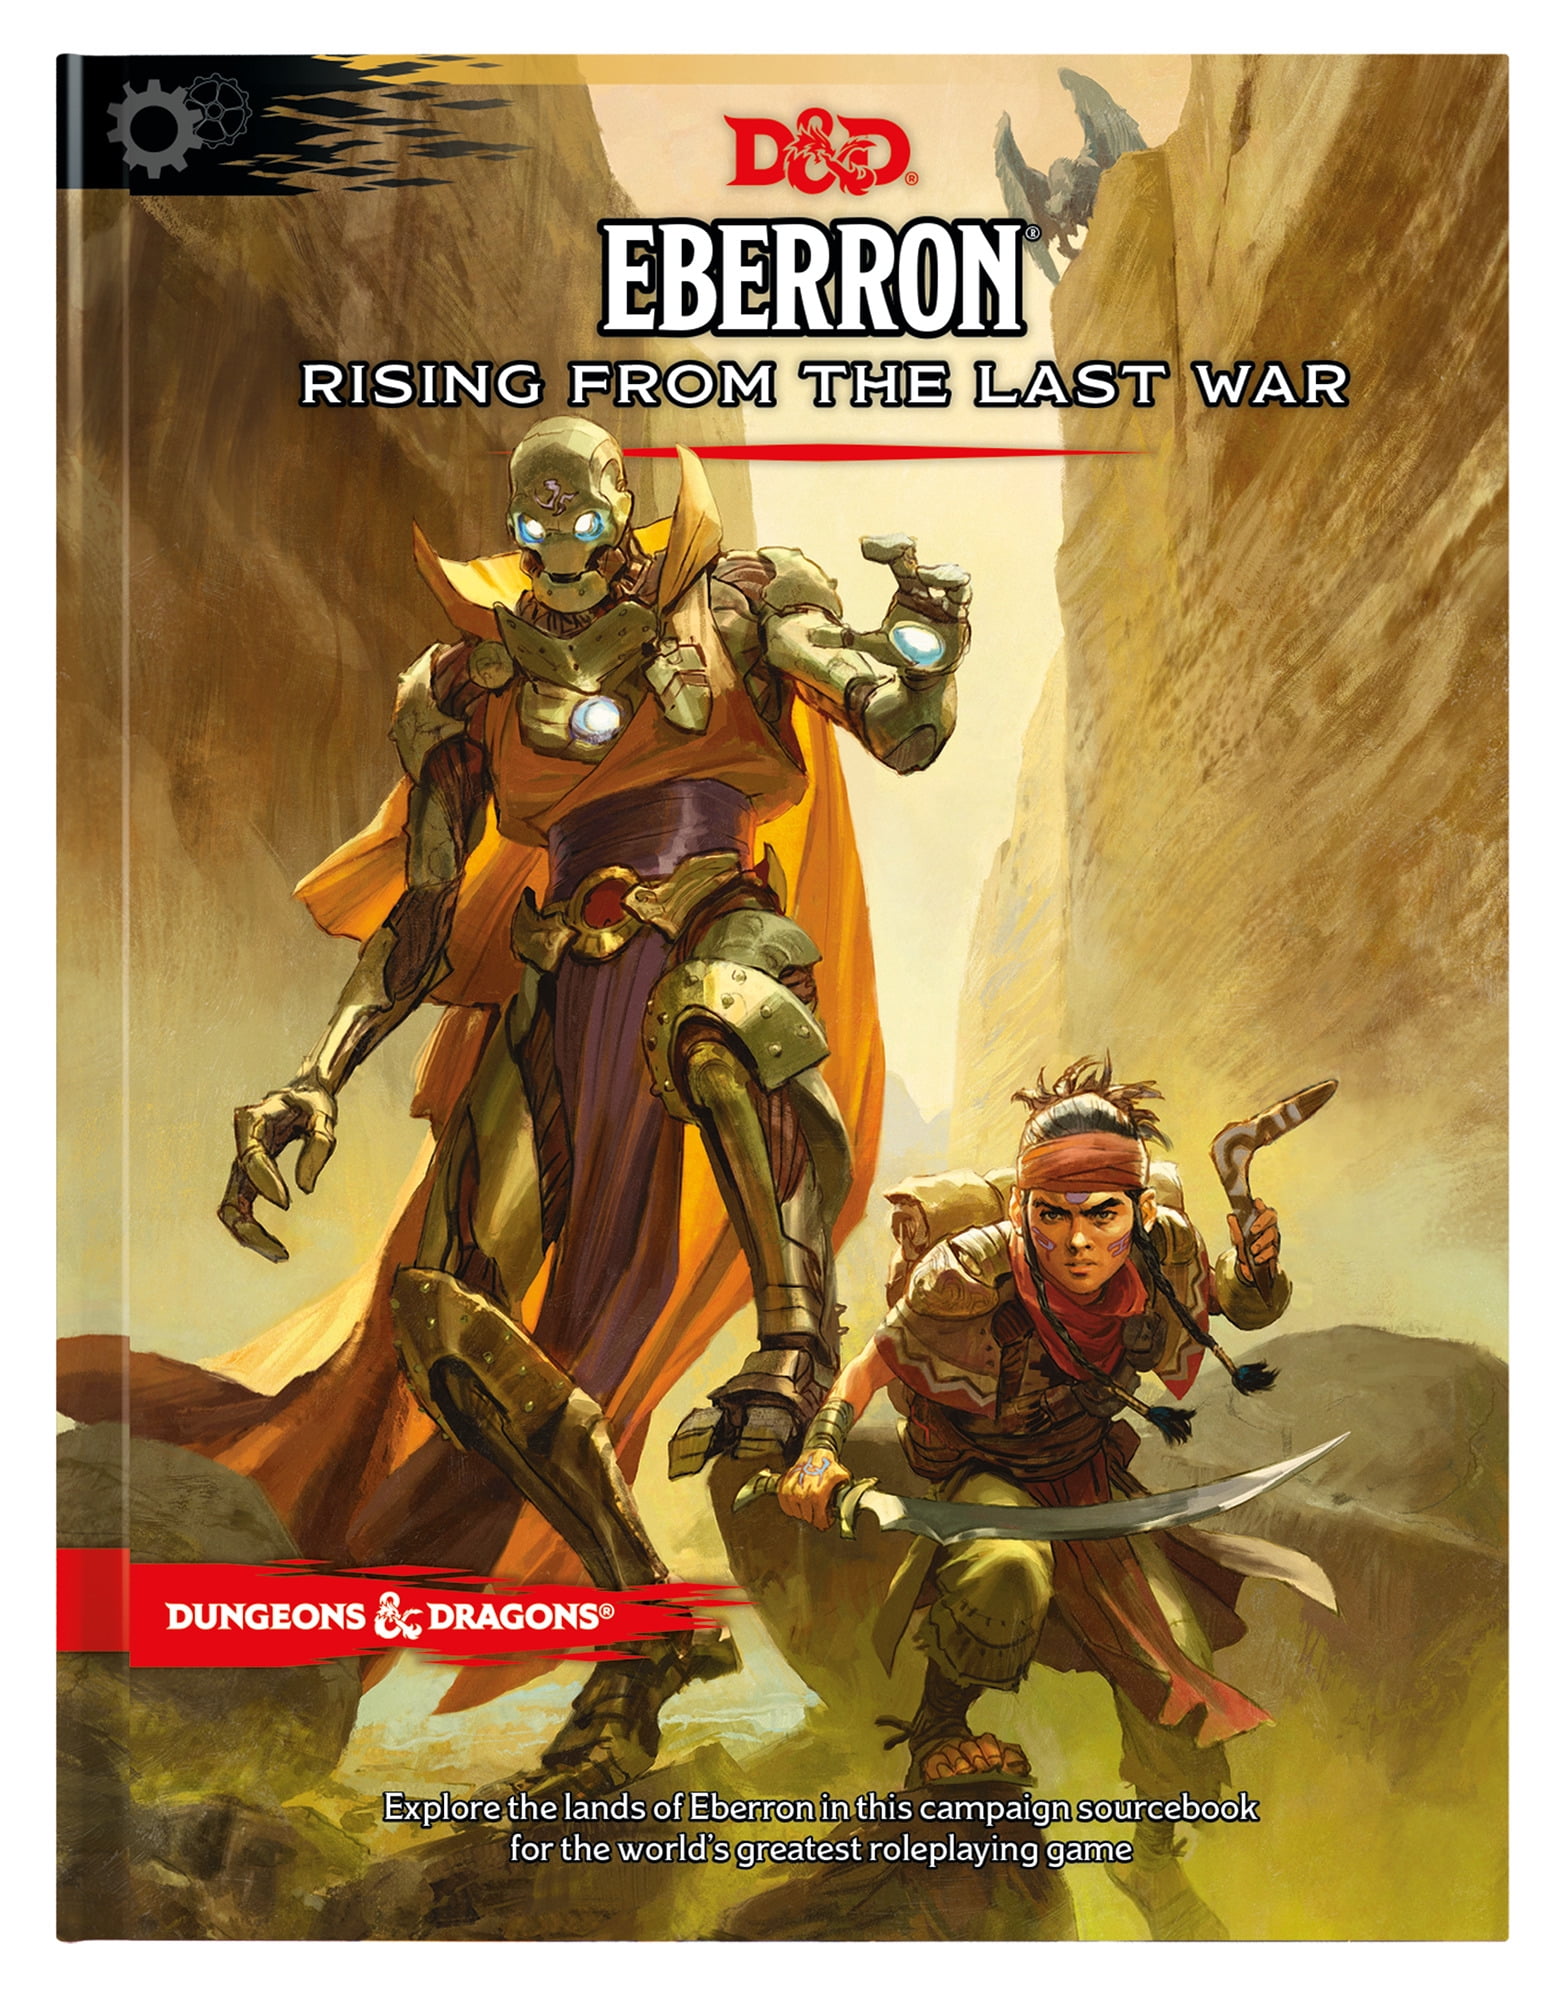 Eberron Rising from the Last War (D&d Campaign Setting and Adventure